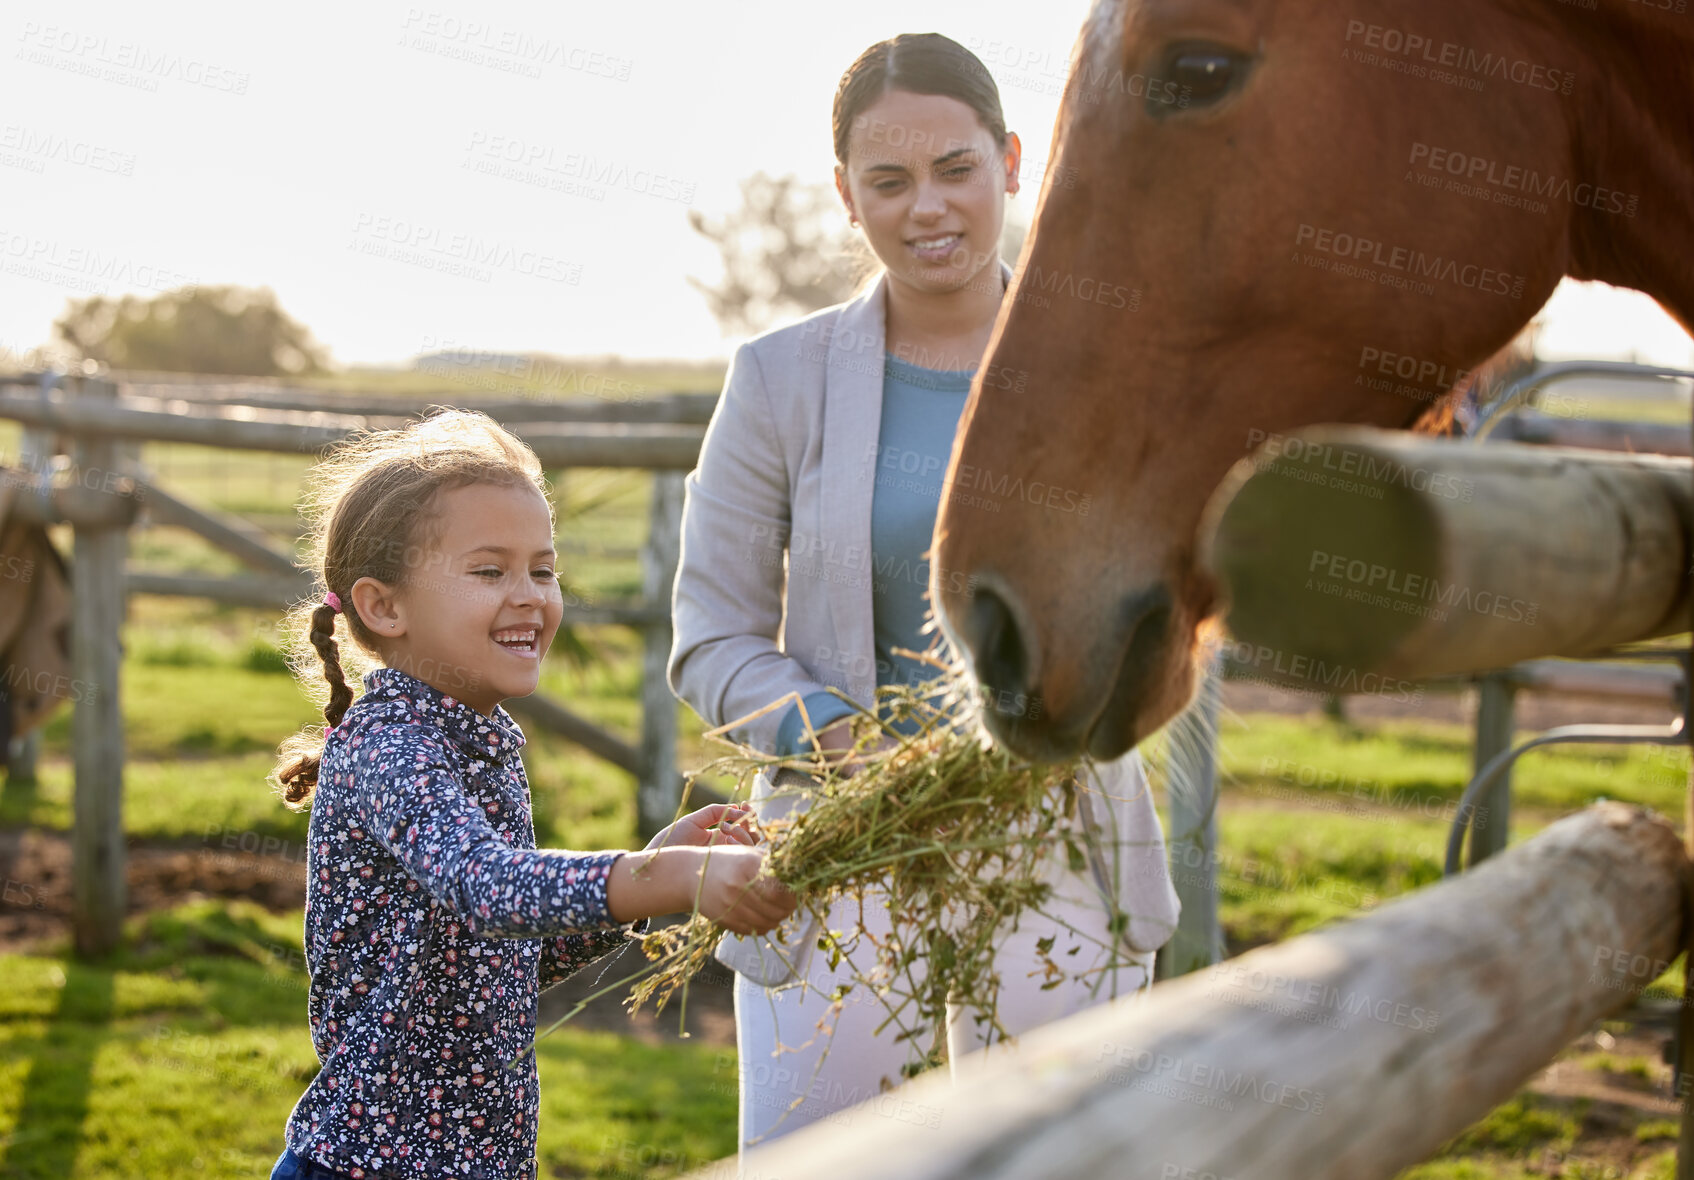 Buy stock photo Shot of an adorable little girl feeding a horse on her farm while her mother looks on